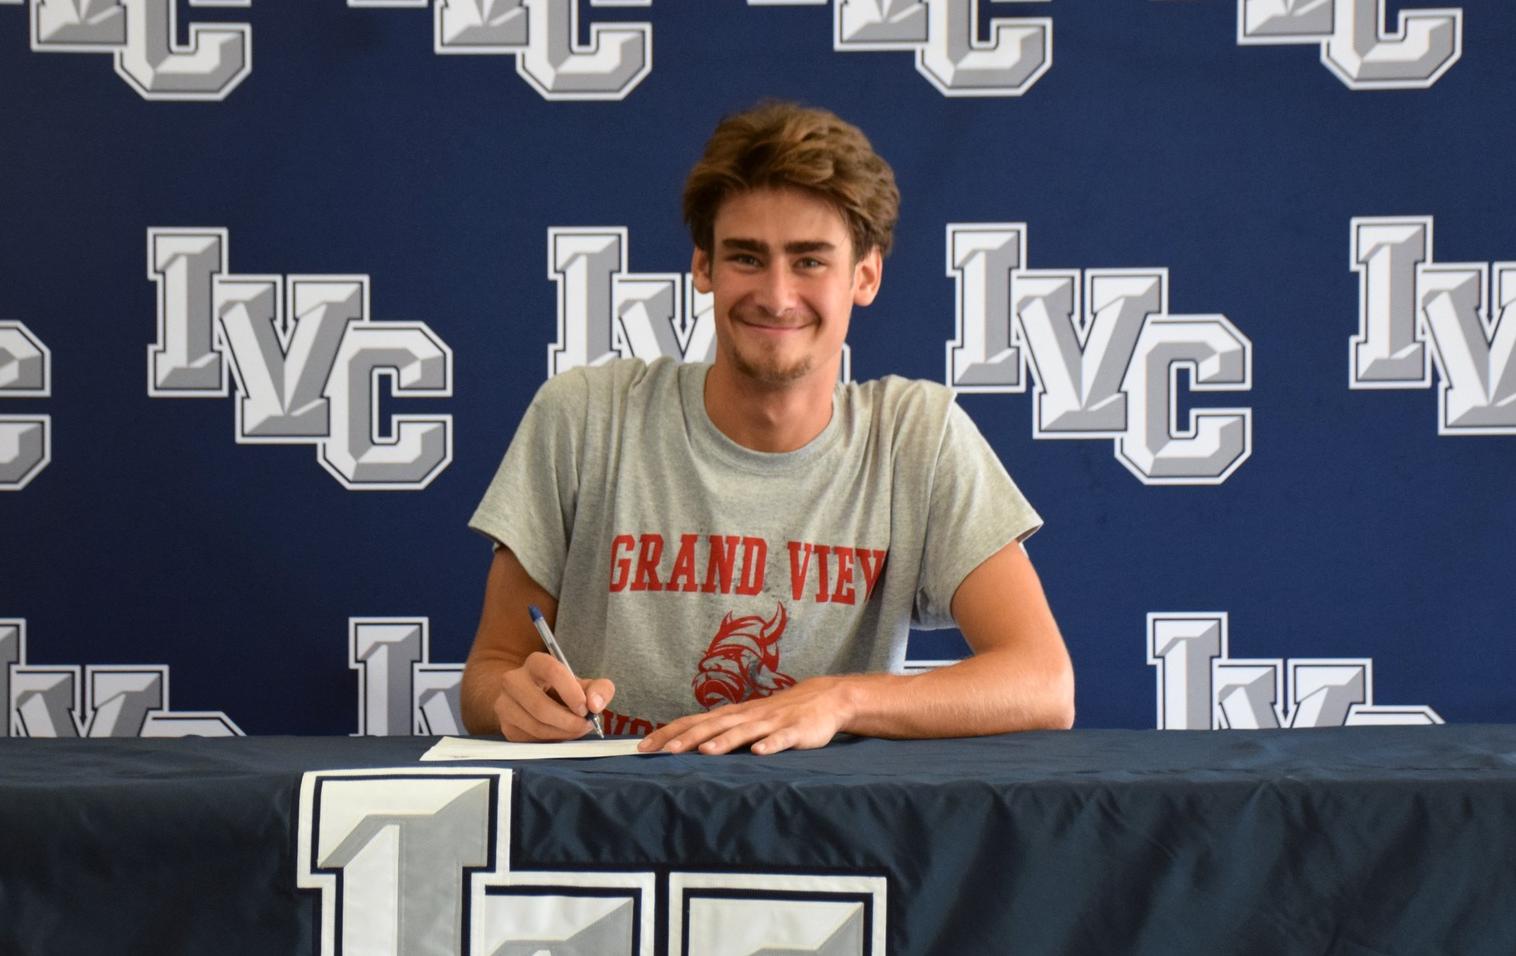 Men's volleyball player Pat Furlong headed to Grand View